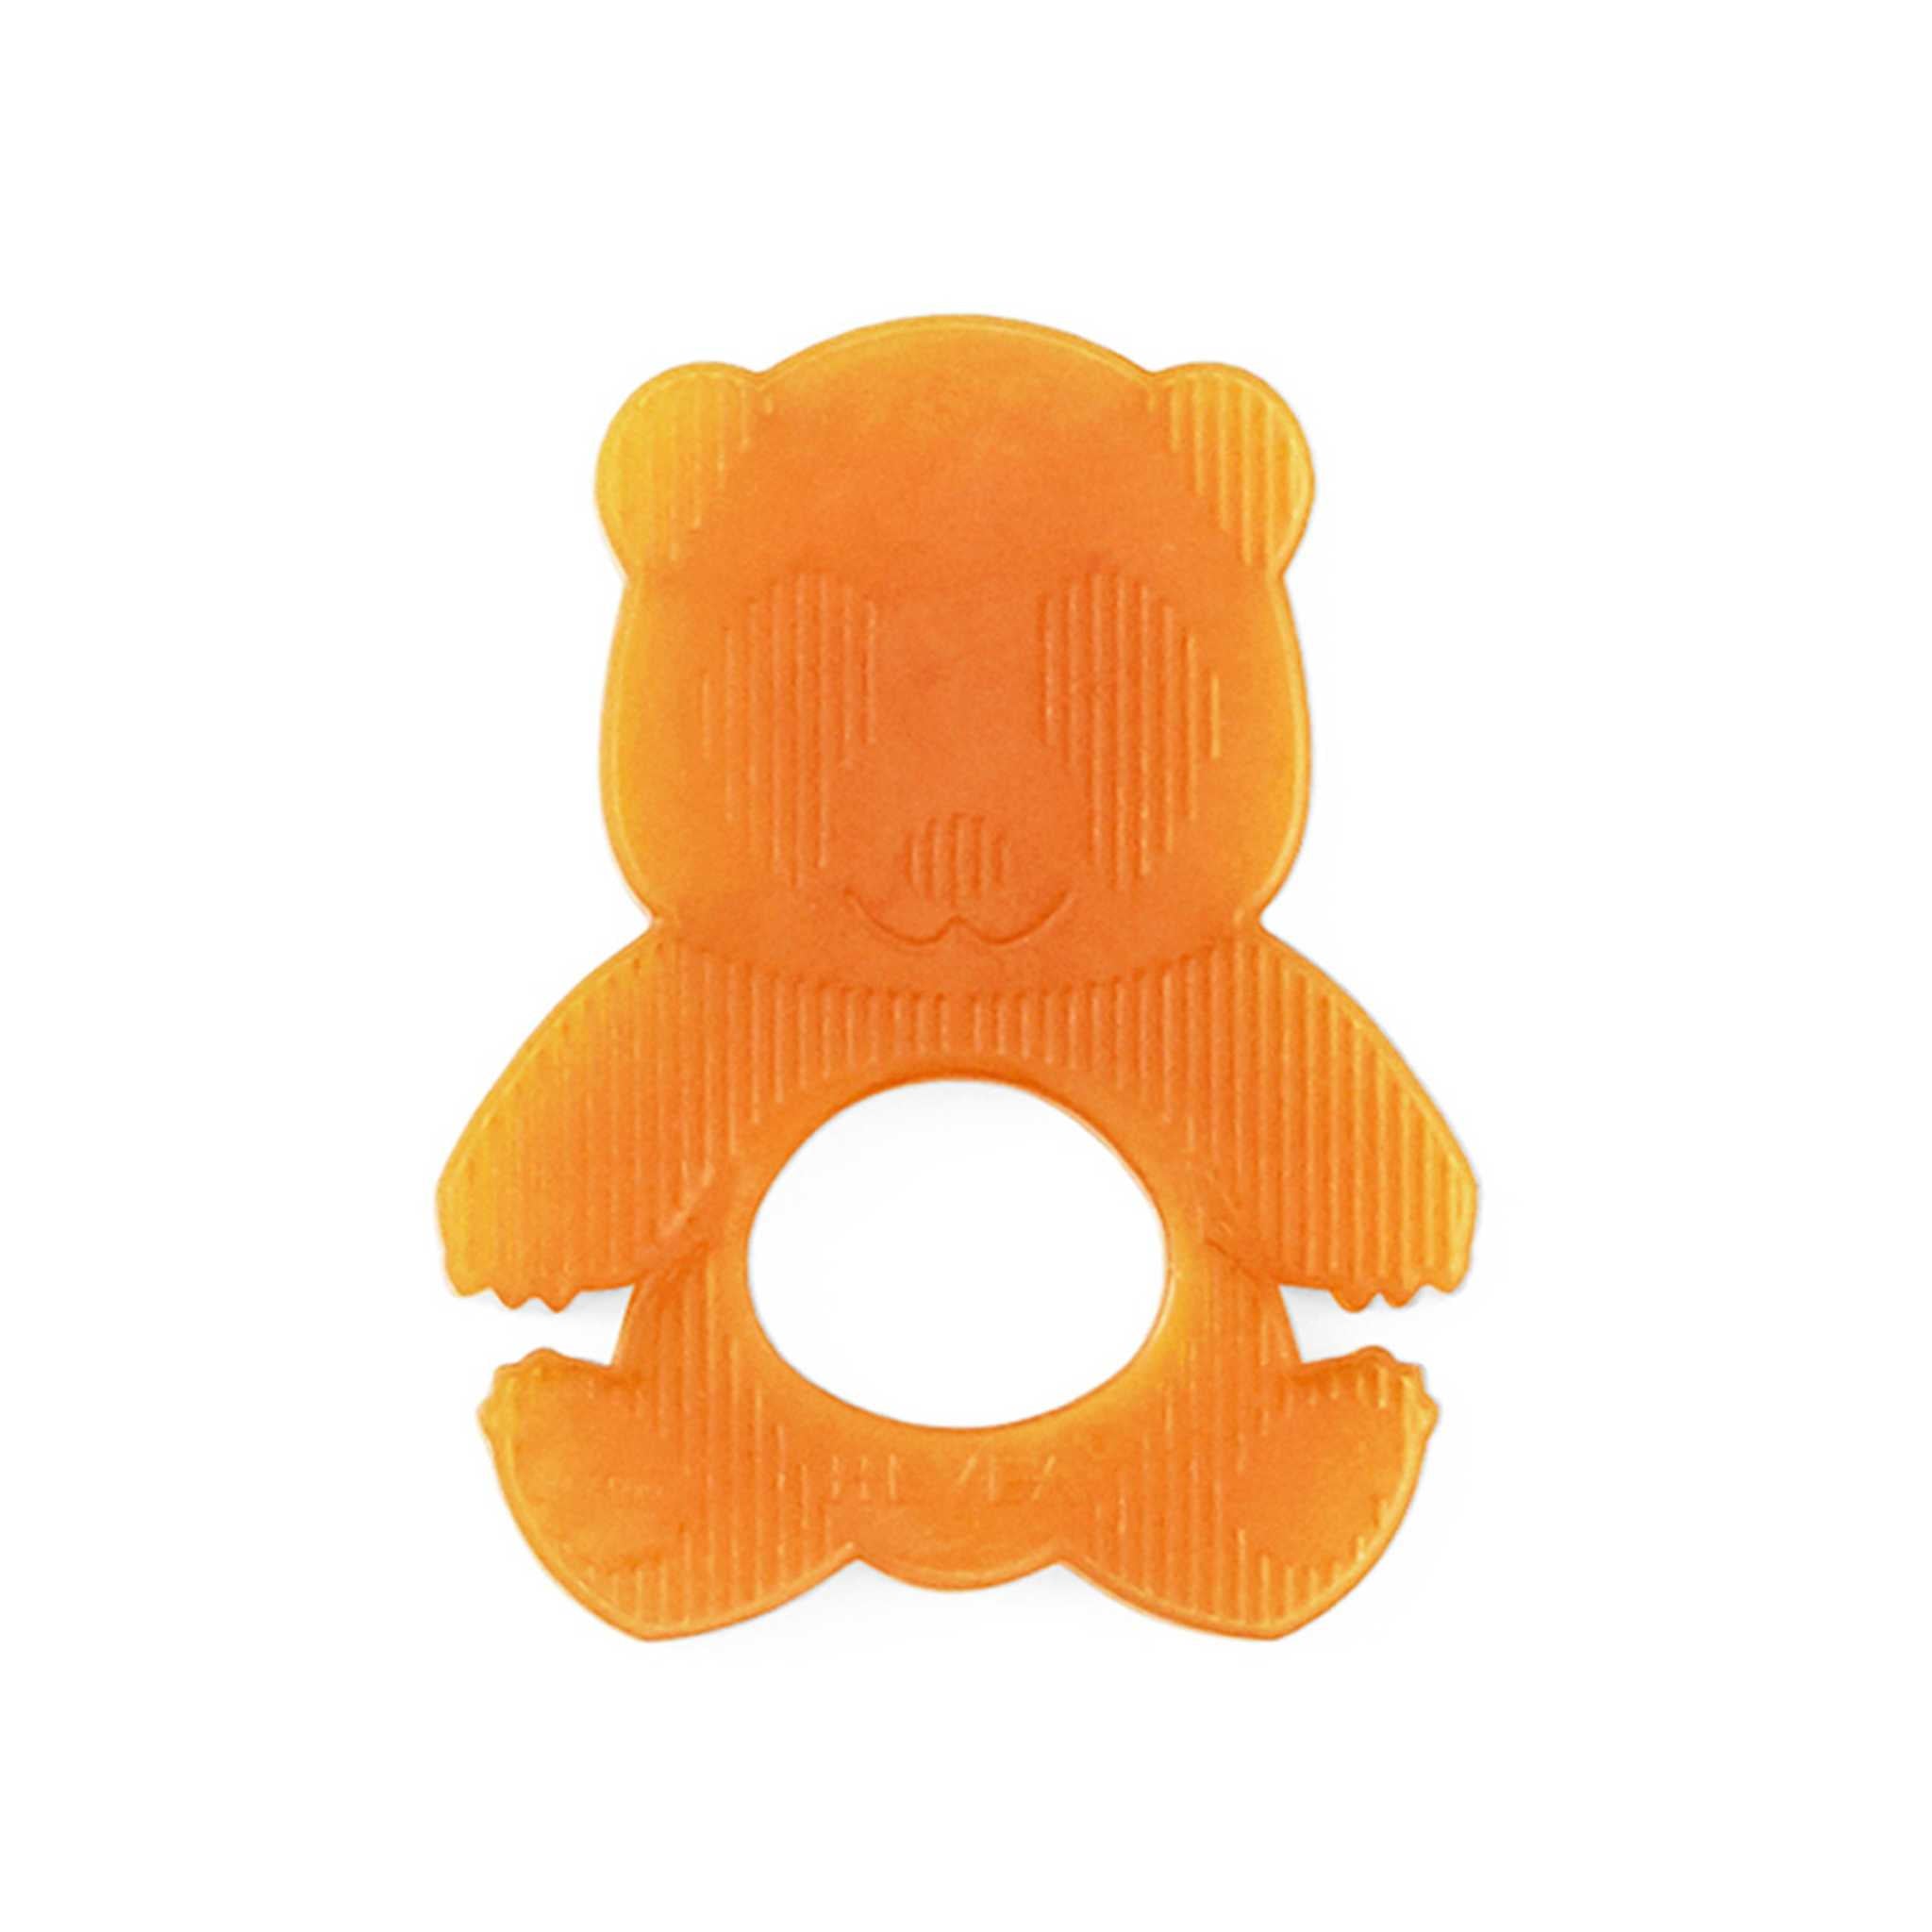 Hevea Natural Rubber Teether Main Image On White Background